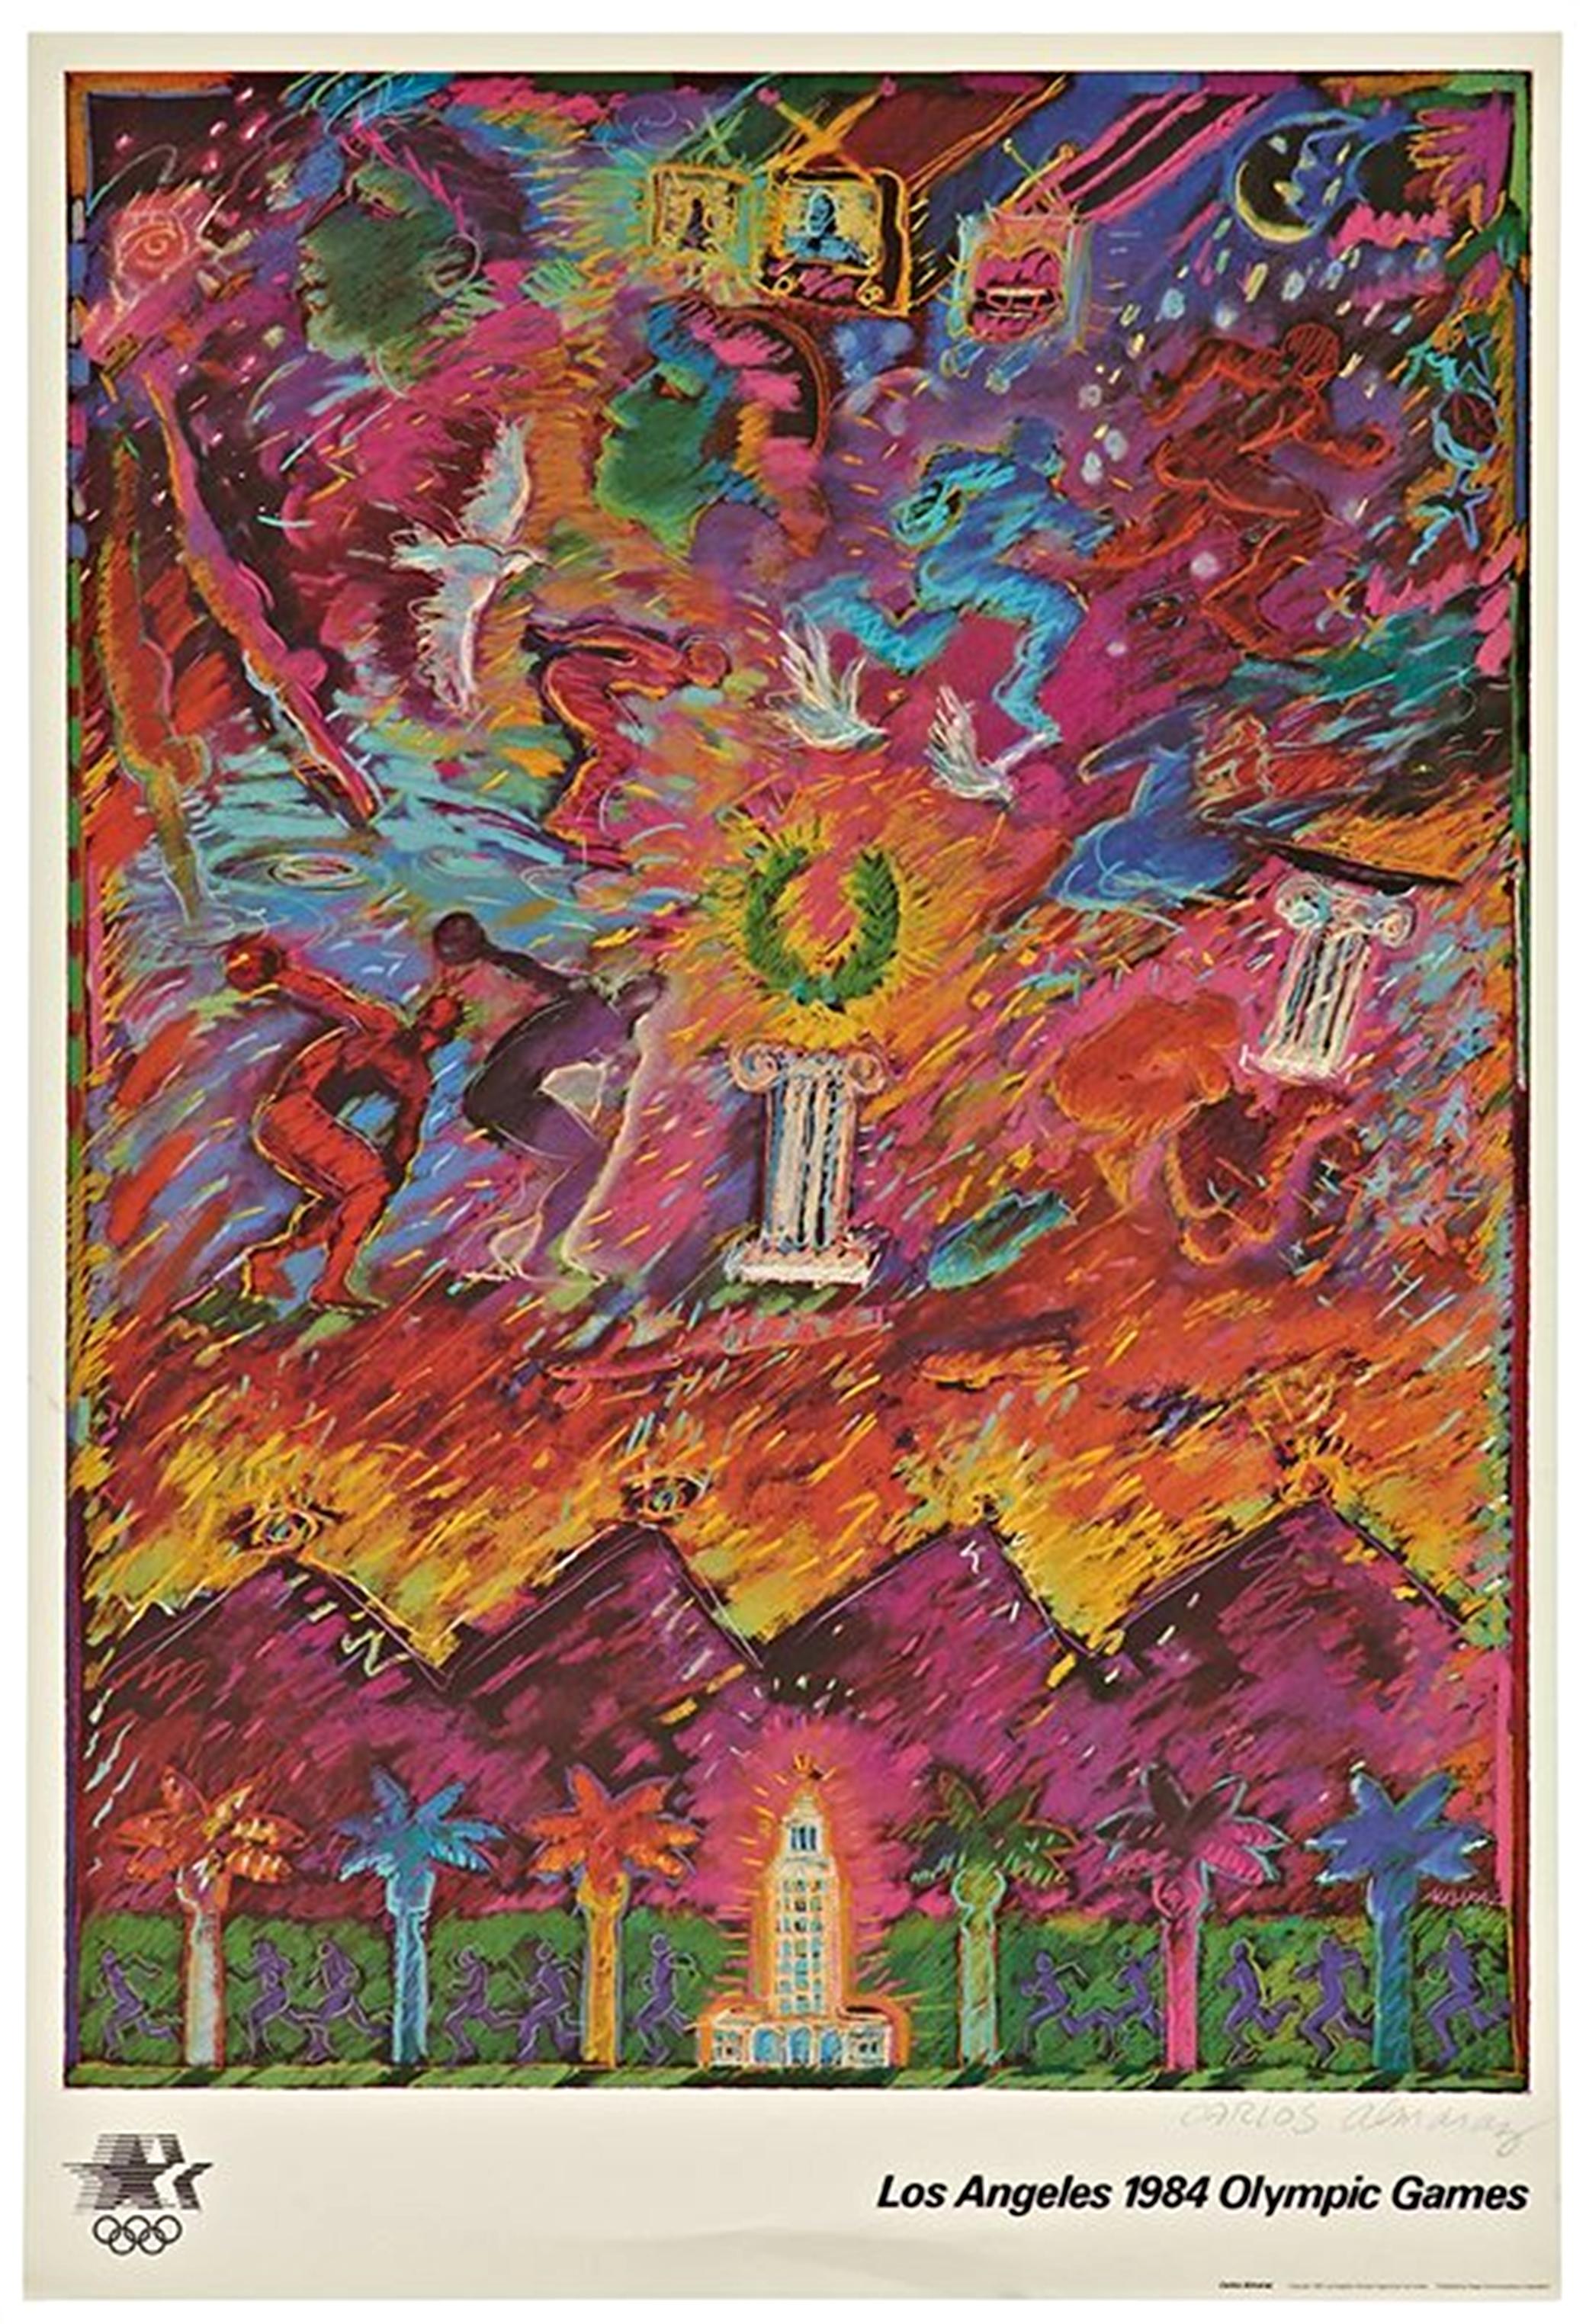 Carlos Almaraz Abstract Print - Los Angeles 1984 Olympic Games (with COA from Olympic Committee)